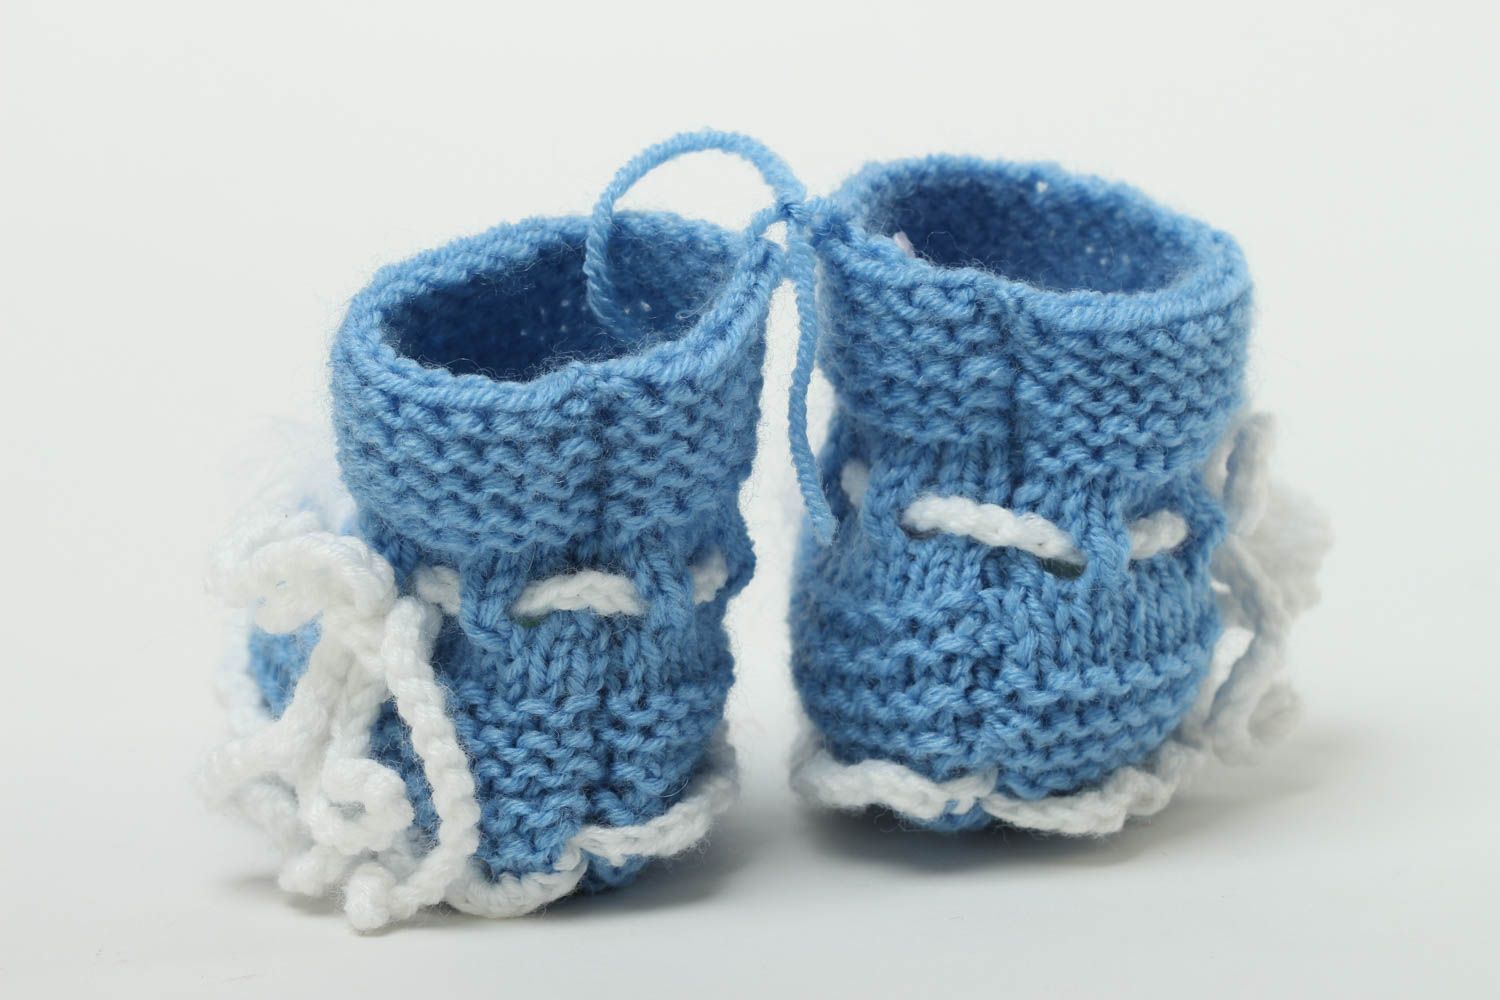 Cute handmade baby bootees warm baby booties crochet ideas gifts for kids photo 3